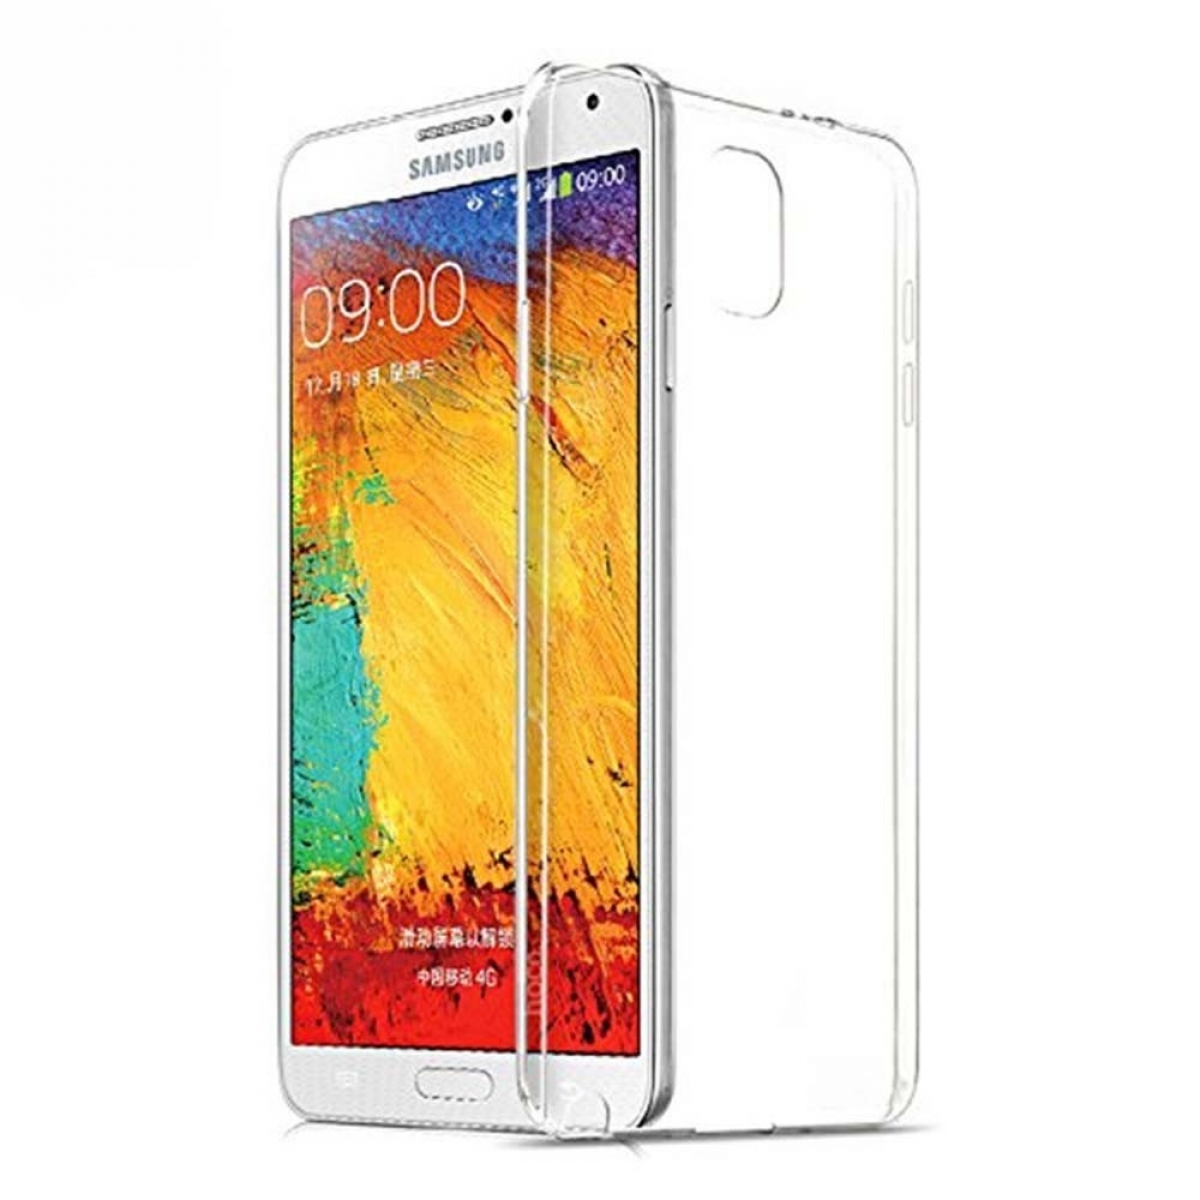 CASEONLINE CA4, Galaxy Backcover, Transparent Note 3, Samsung